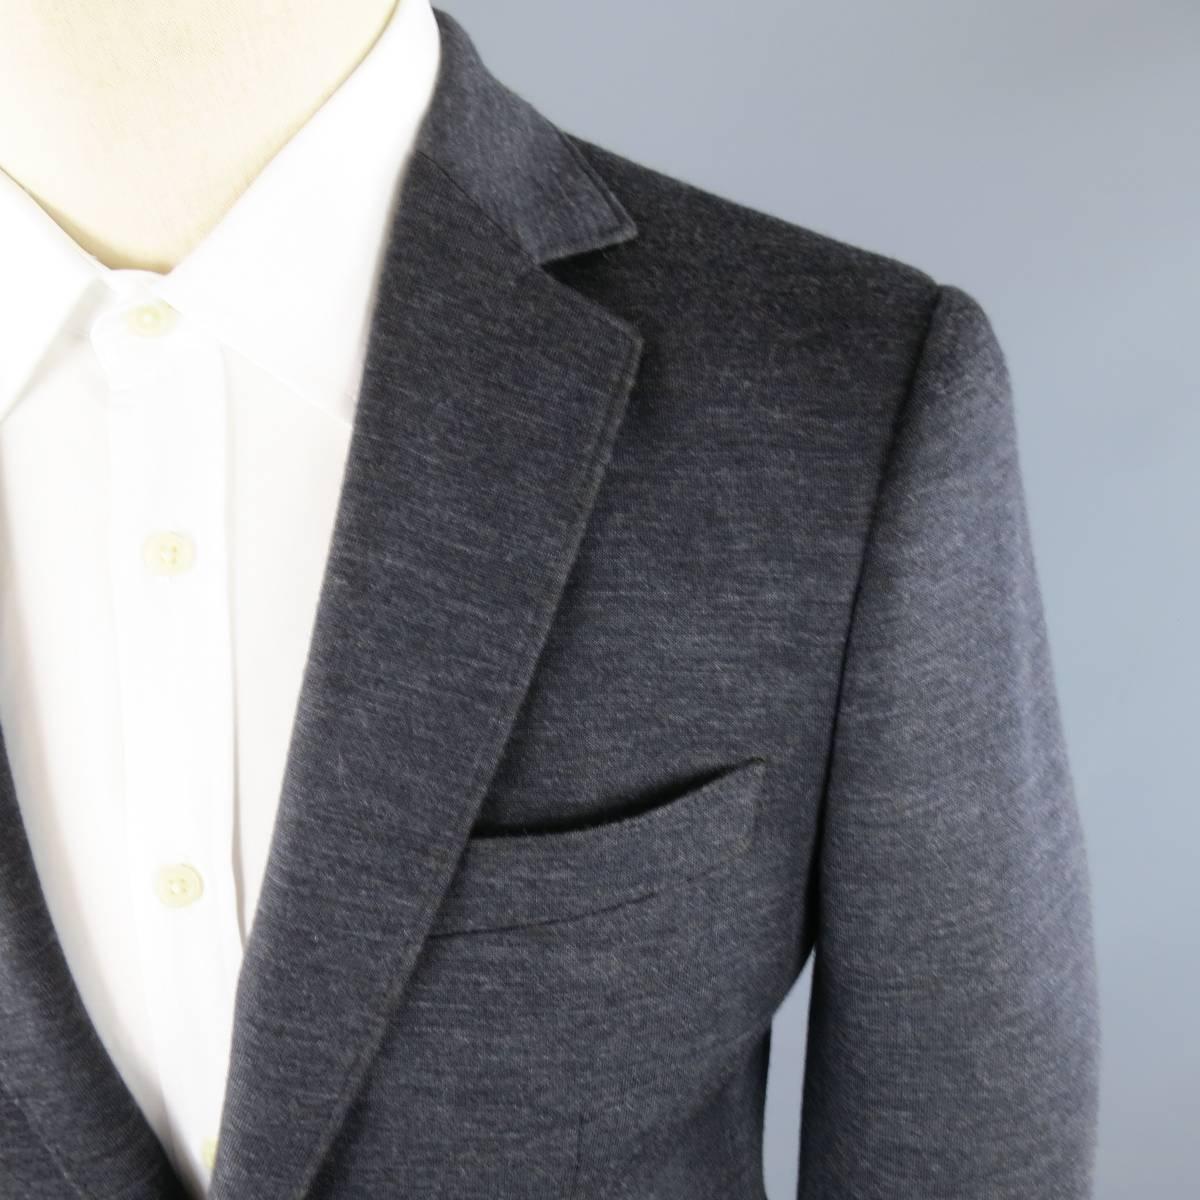 BRAND NEW SALVATORE FERRAGAMO Sport Coat consists of wool blend material in a charcoal color tone. Designed in a 2 button front, notch lapel collar and 4 button cuff sleeves. Detailed with top pocket square, bottom flap pockets and single back vent.